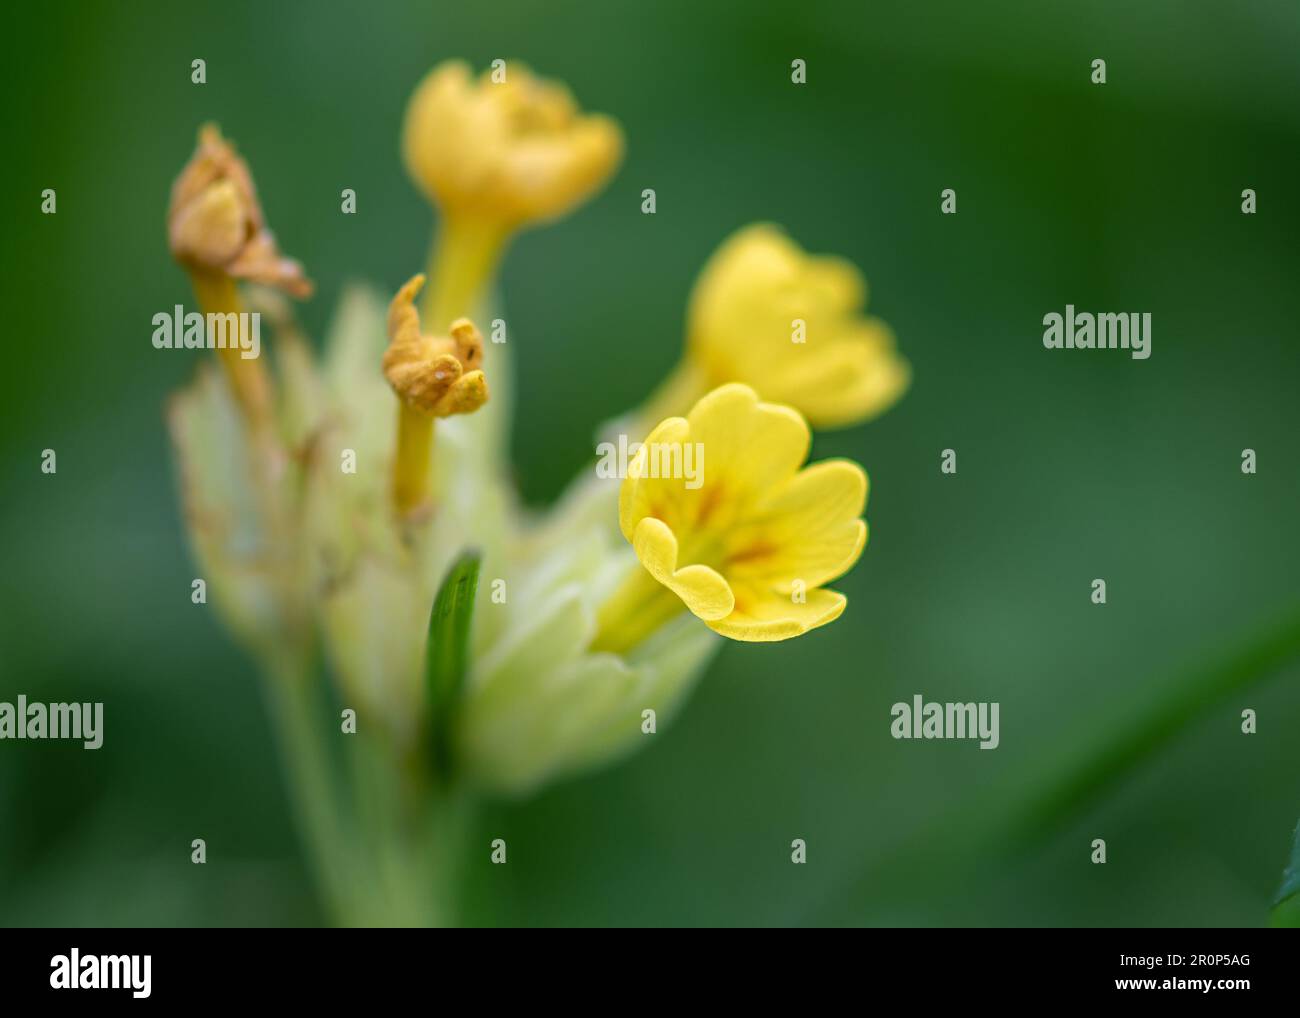 The delicate yellow of the primrose shines amidst springtime, reminding us that beauty is often found in the simplest things Stock Photo